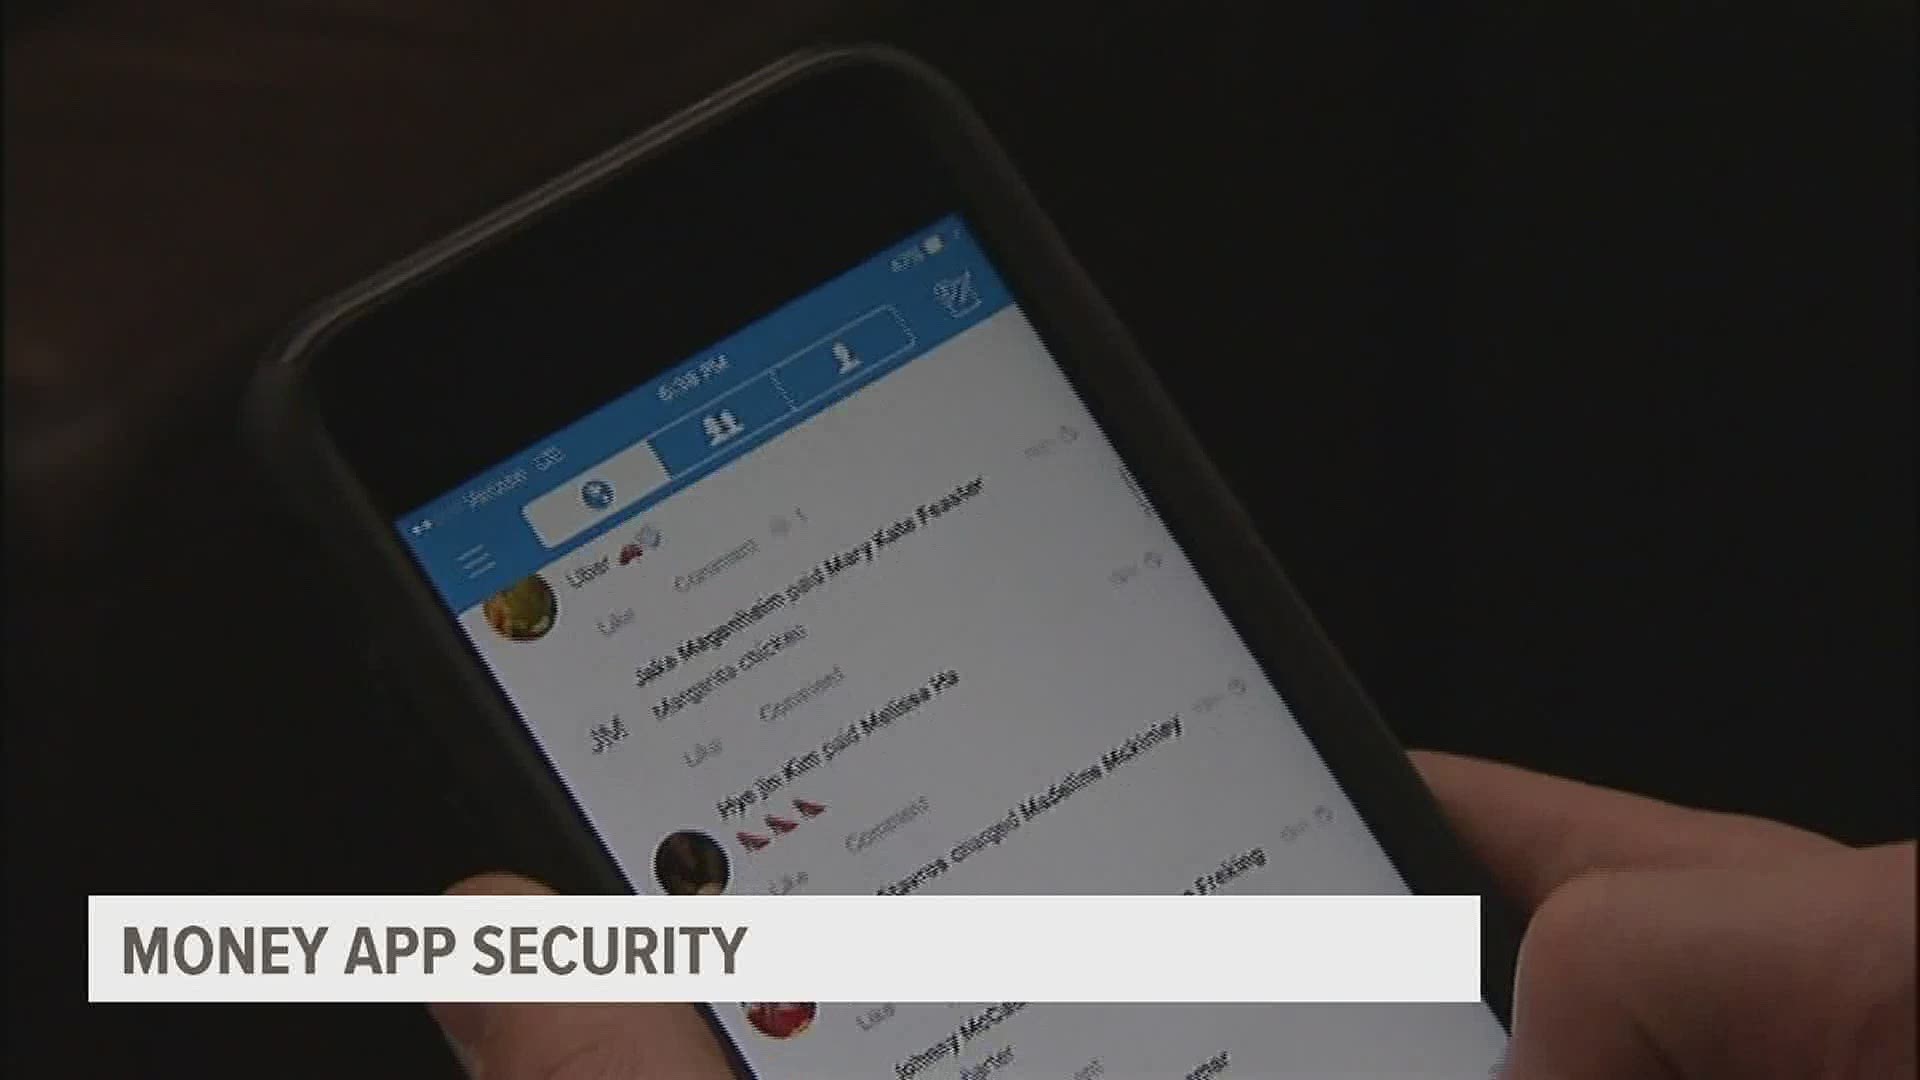 Security experts warn consumers to be careful and protect their privacy as popularity in apps rise